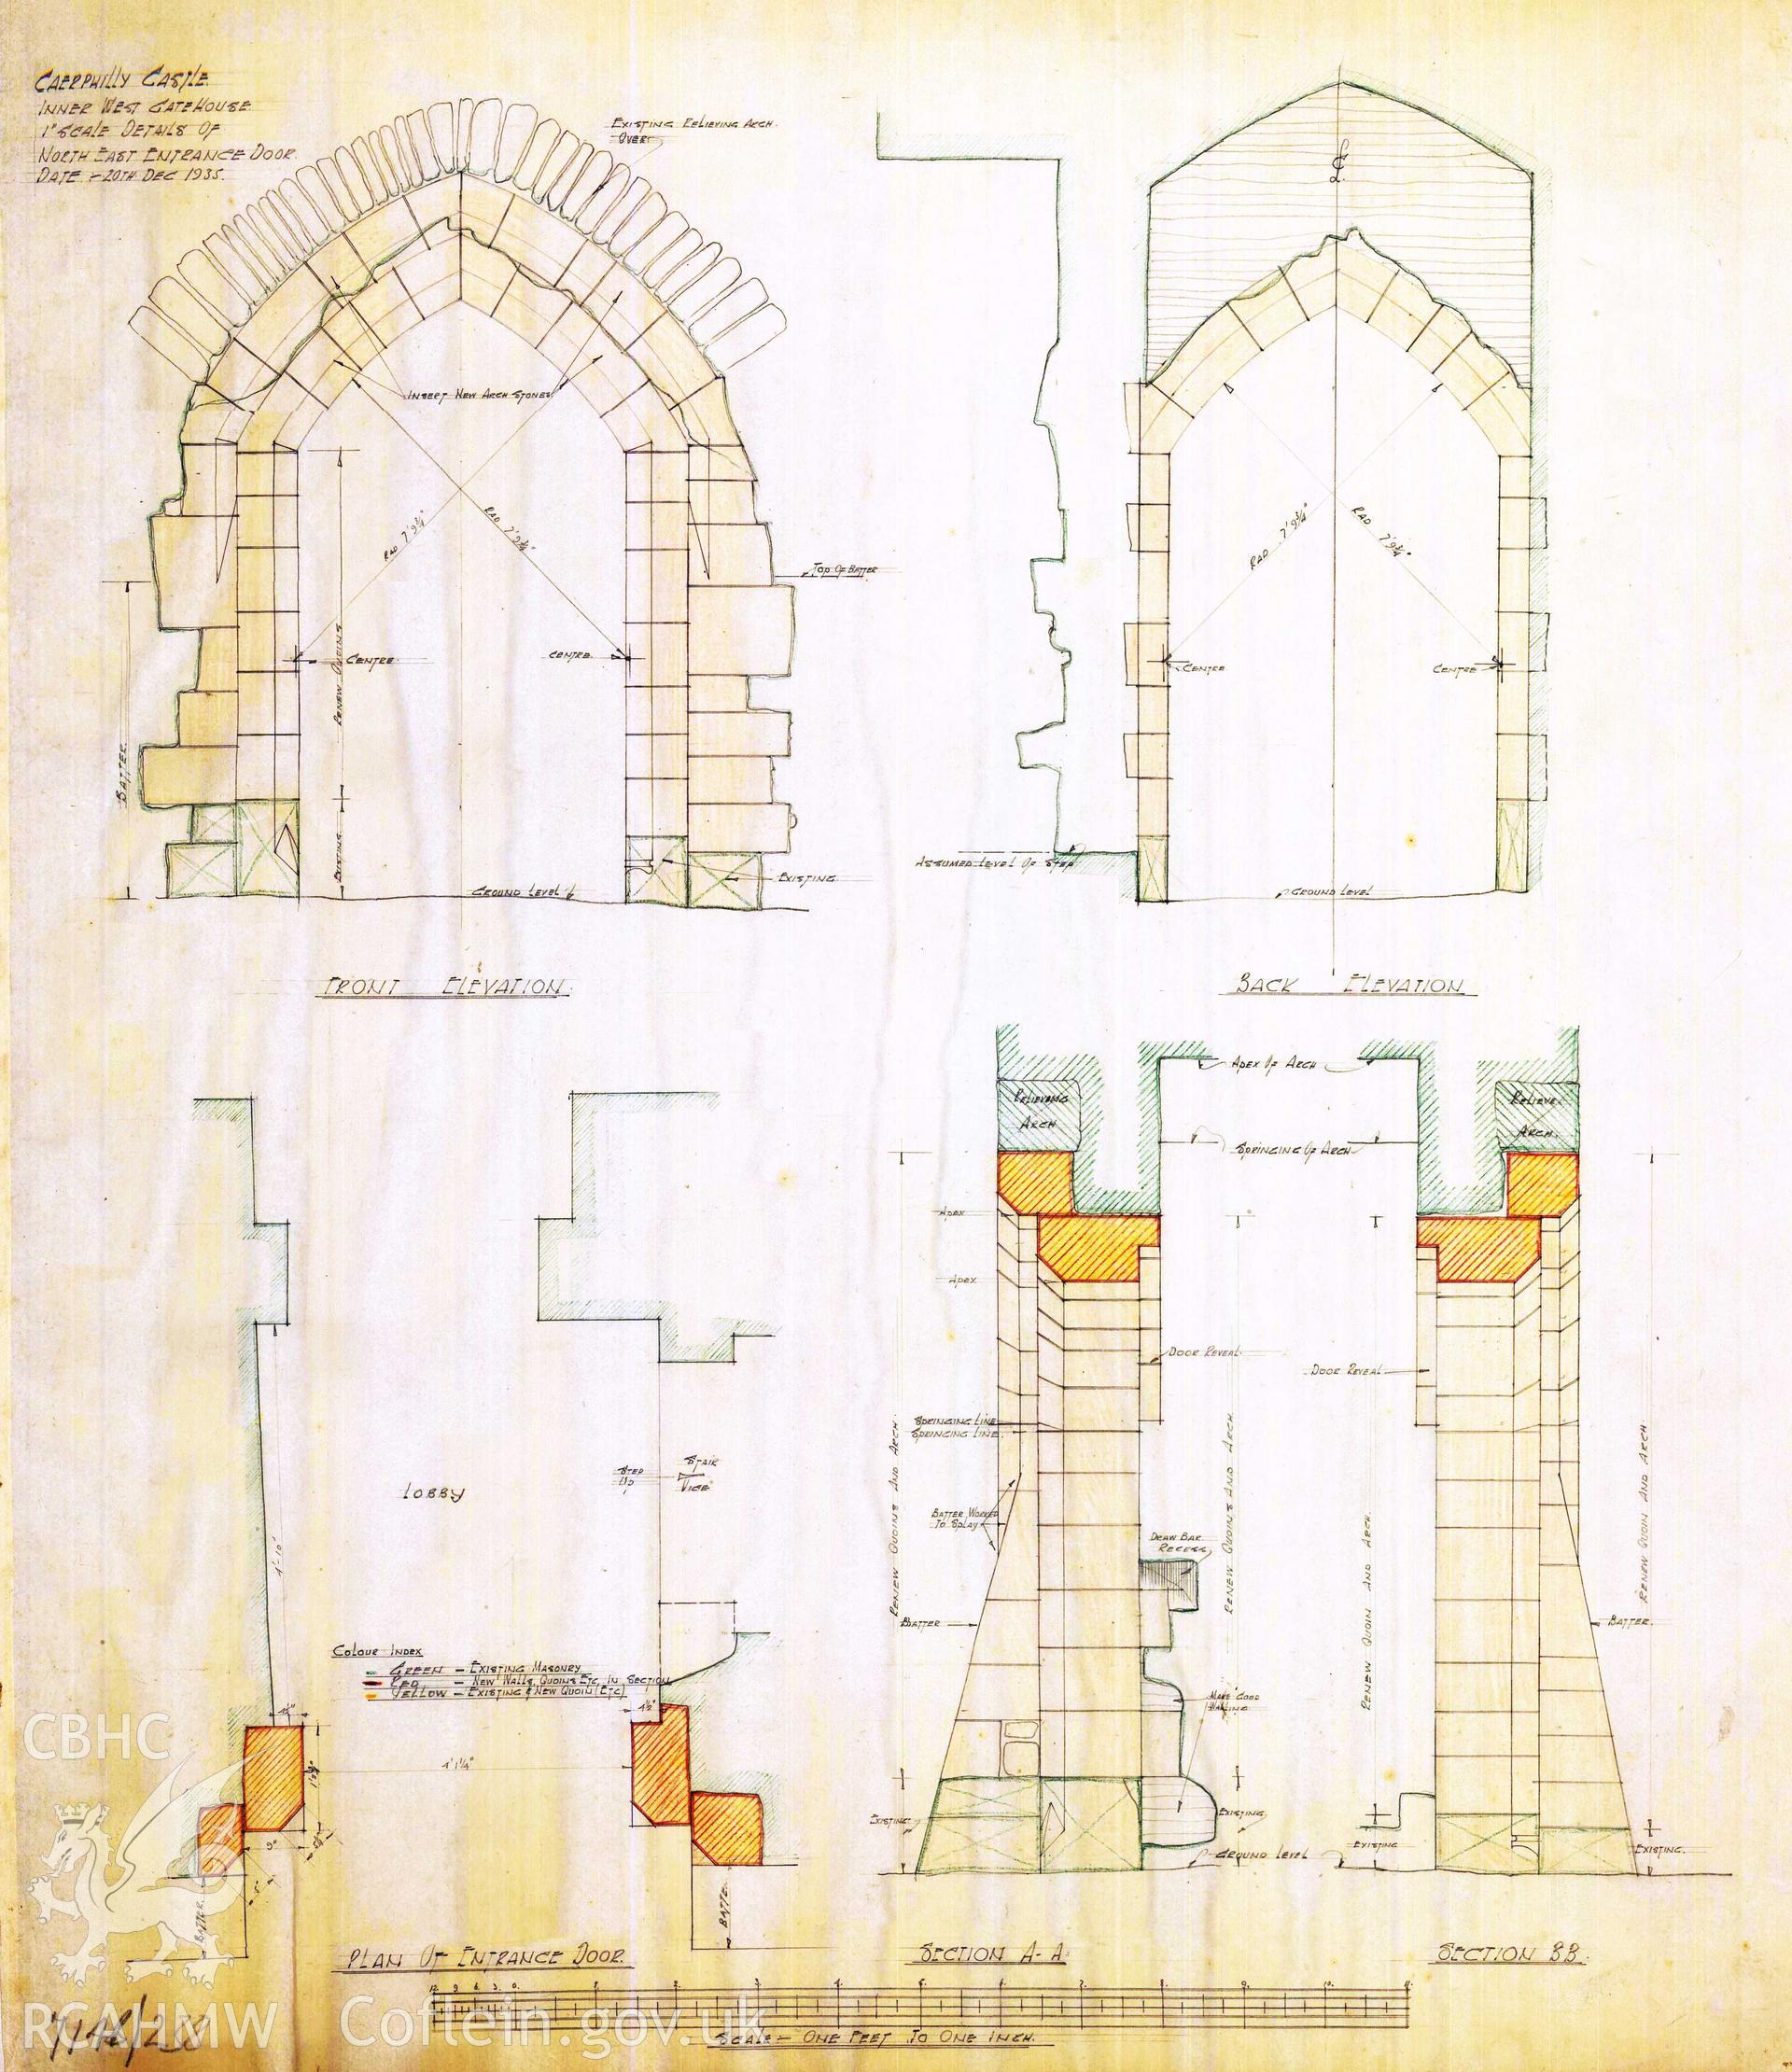 Cadw guardianship monument drawing of Caerphilly Castle. Inner W gate, N rear doorway. Cadw Ref. No:714B/238. Scale 1:12.